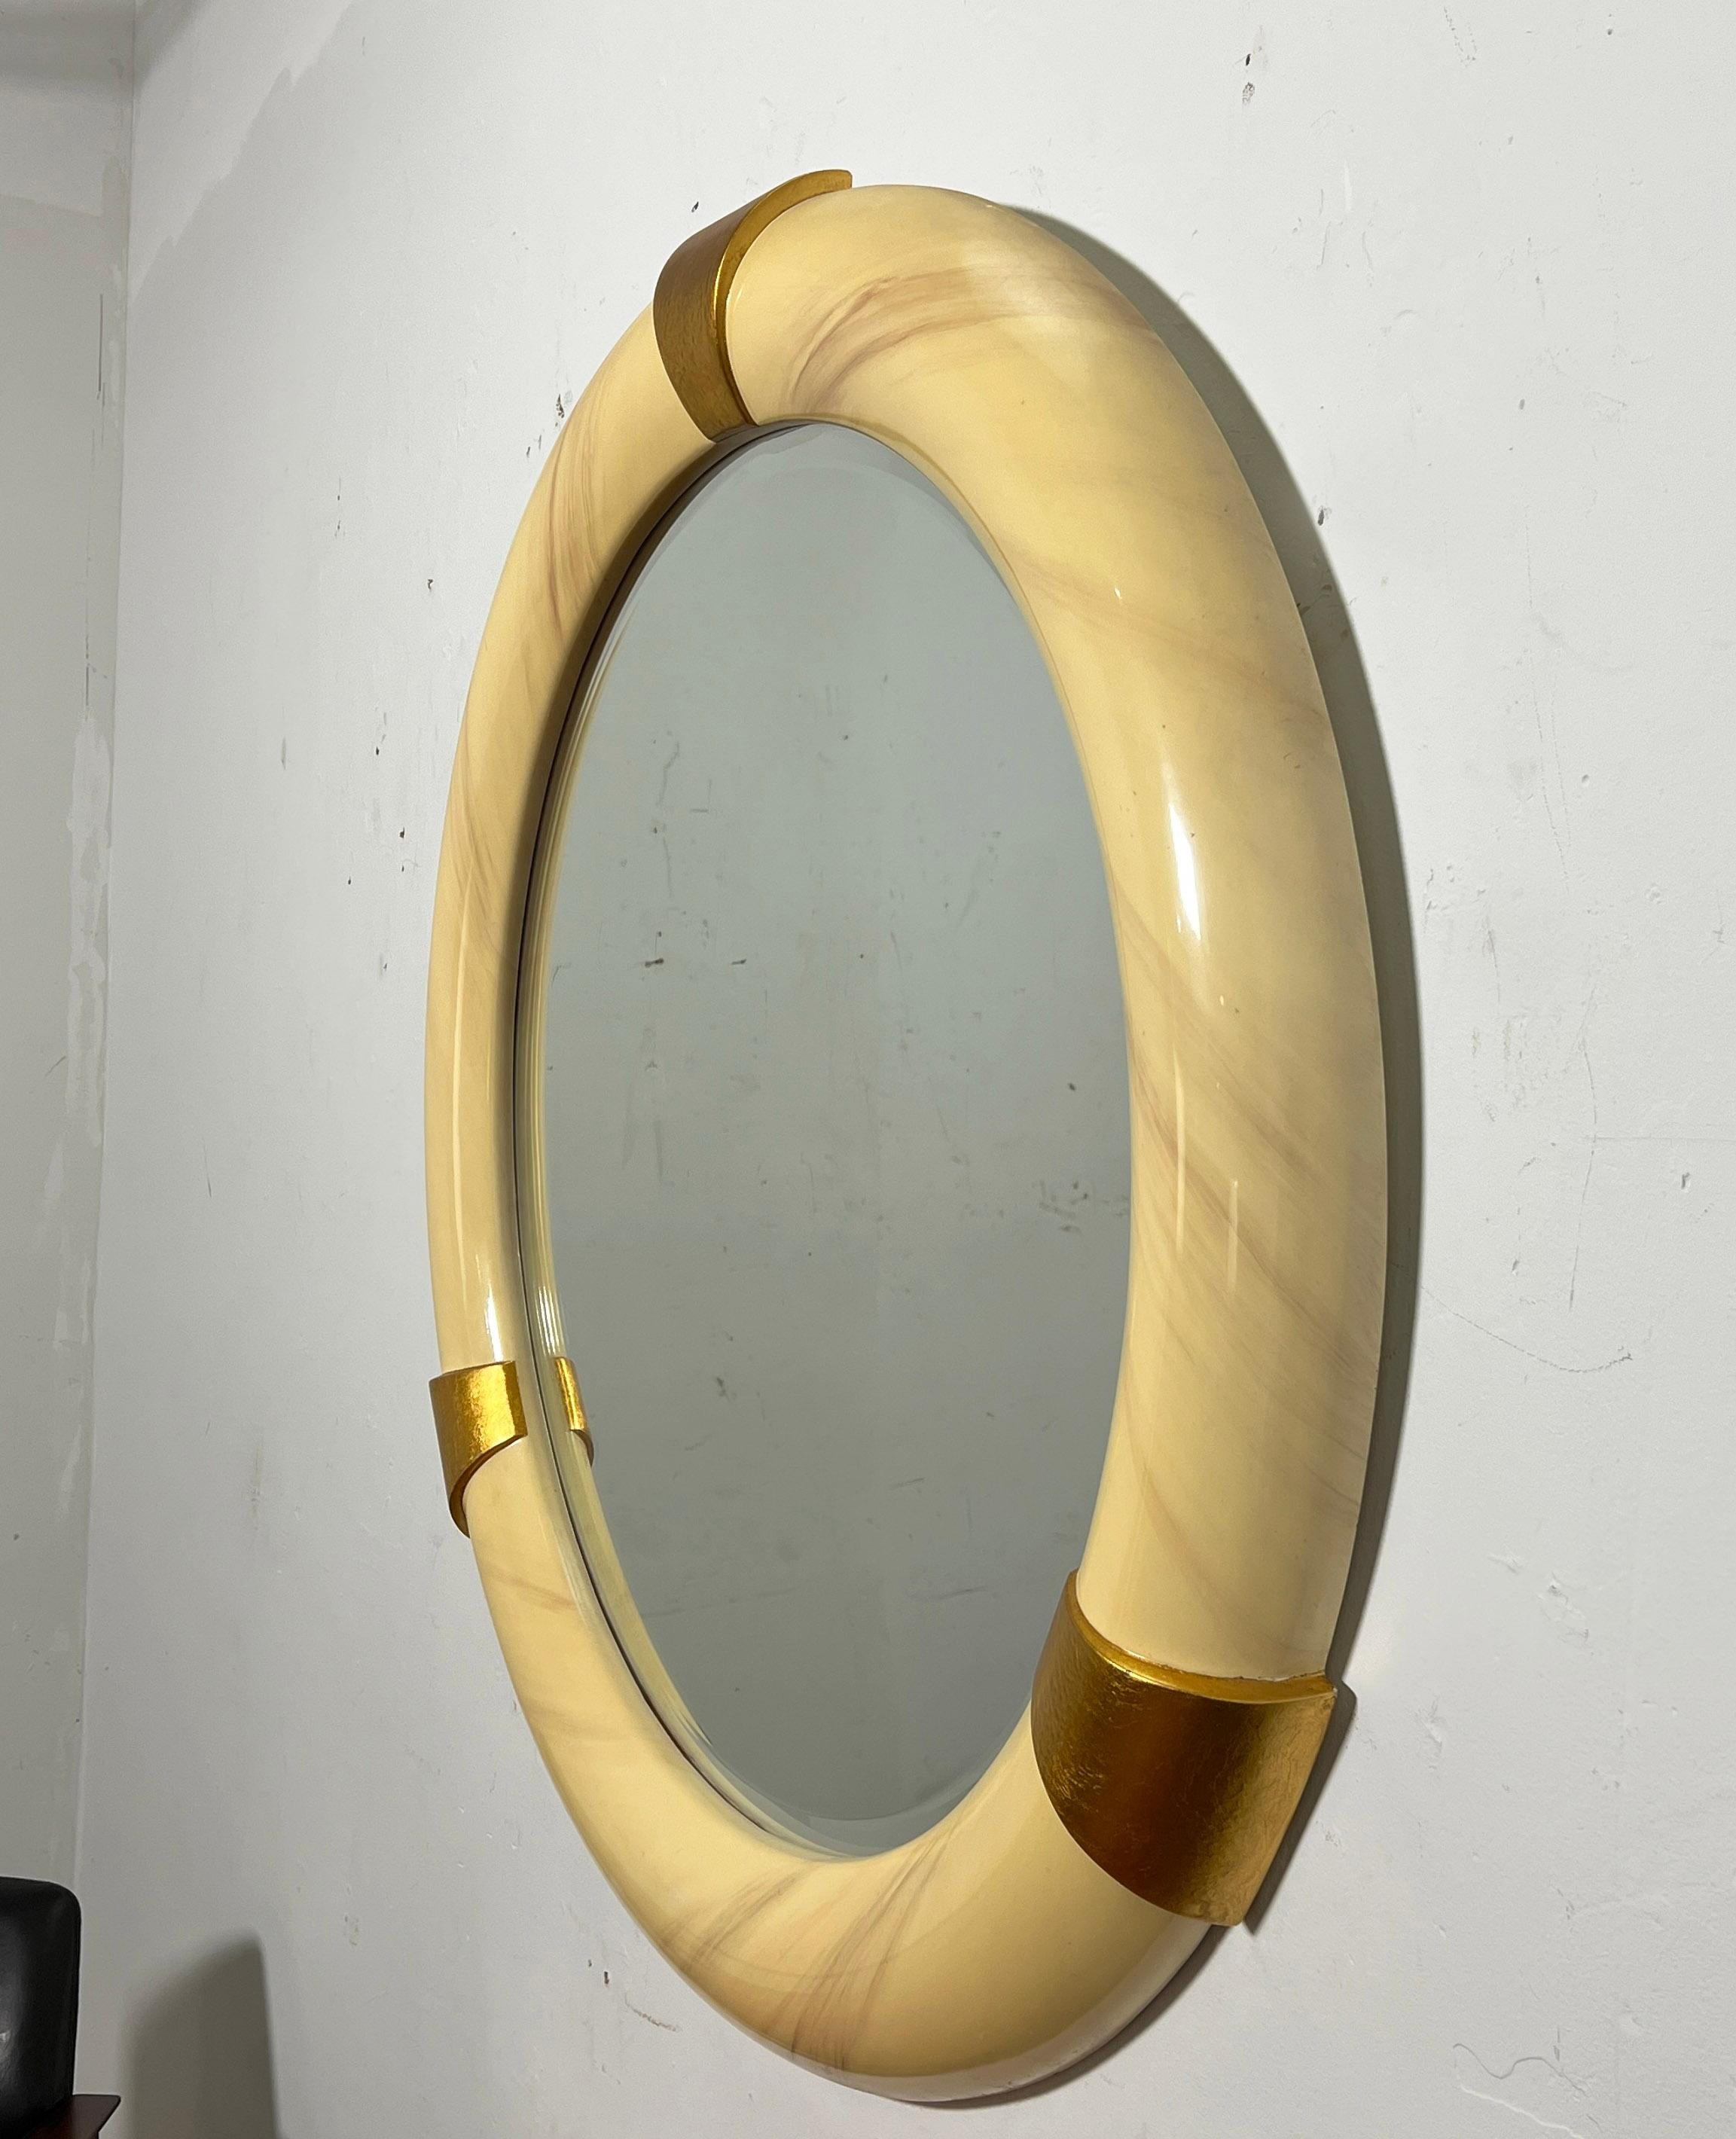 Rondelle wall mirror lacquered in a faux goatskin pattern, with gold leaf accents.